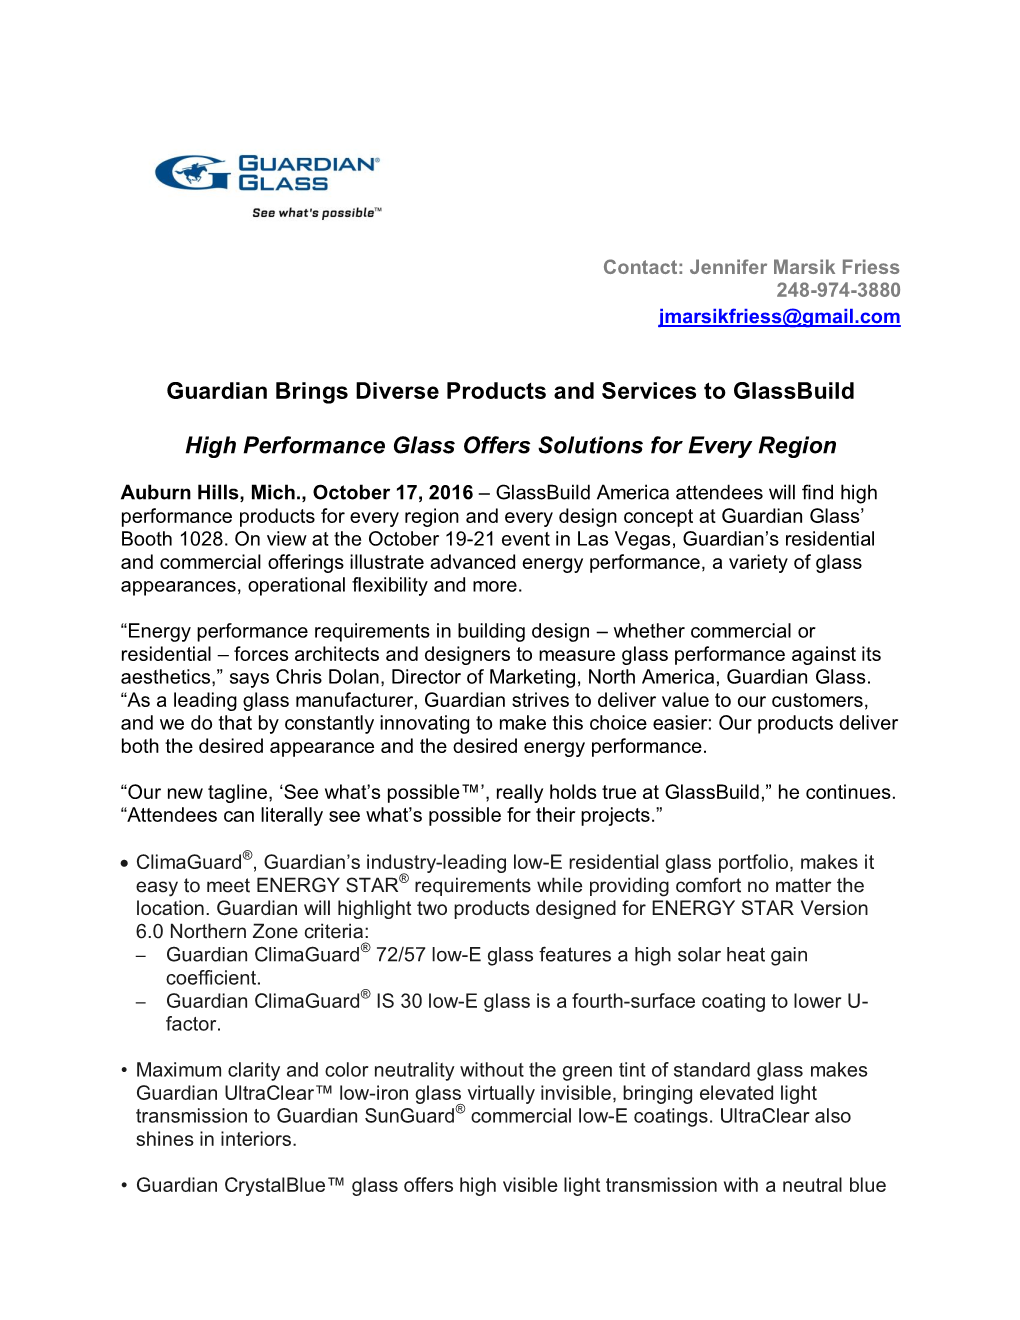 Guardian Brings Diverse Products and Services to Glassbuild High